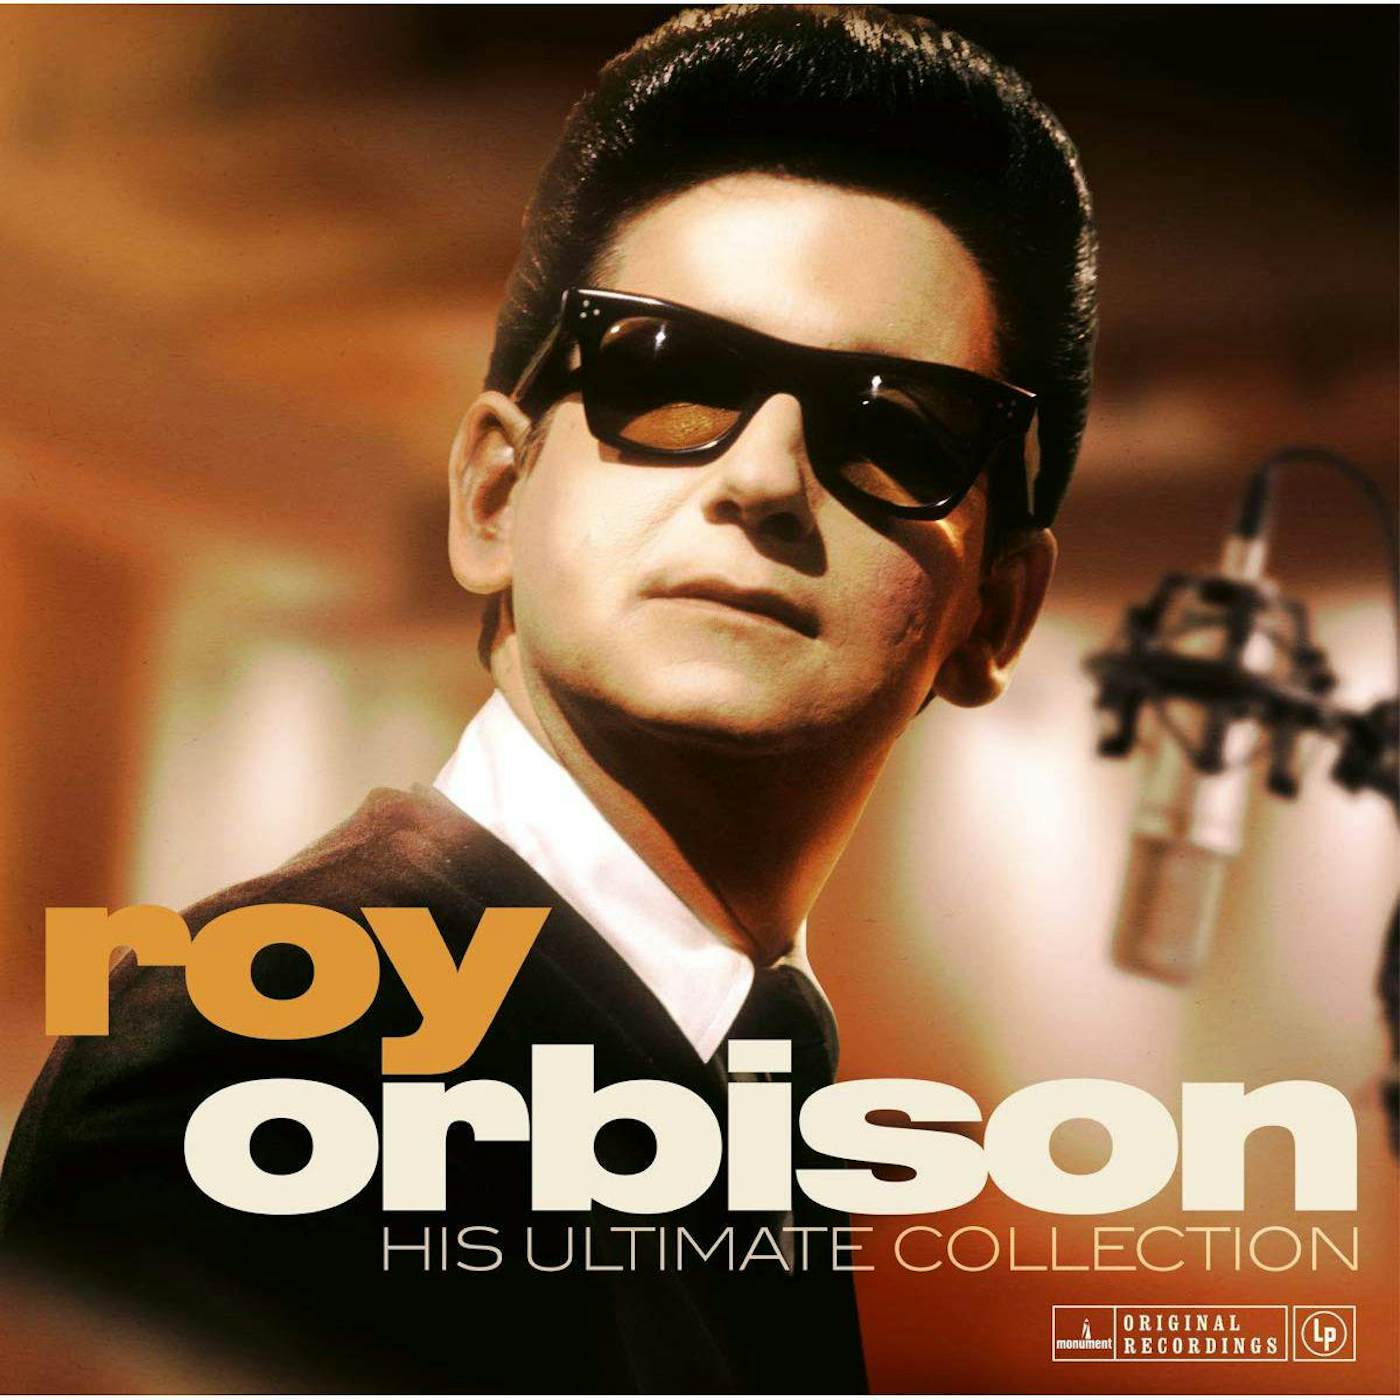 Roy Orbison HIS ULTIMATE COLLECTION Vinyl Record